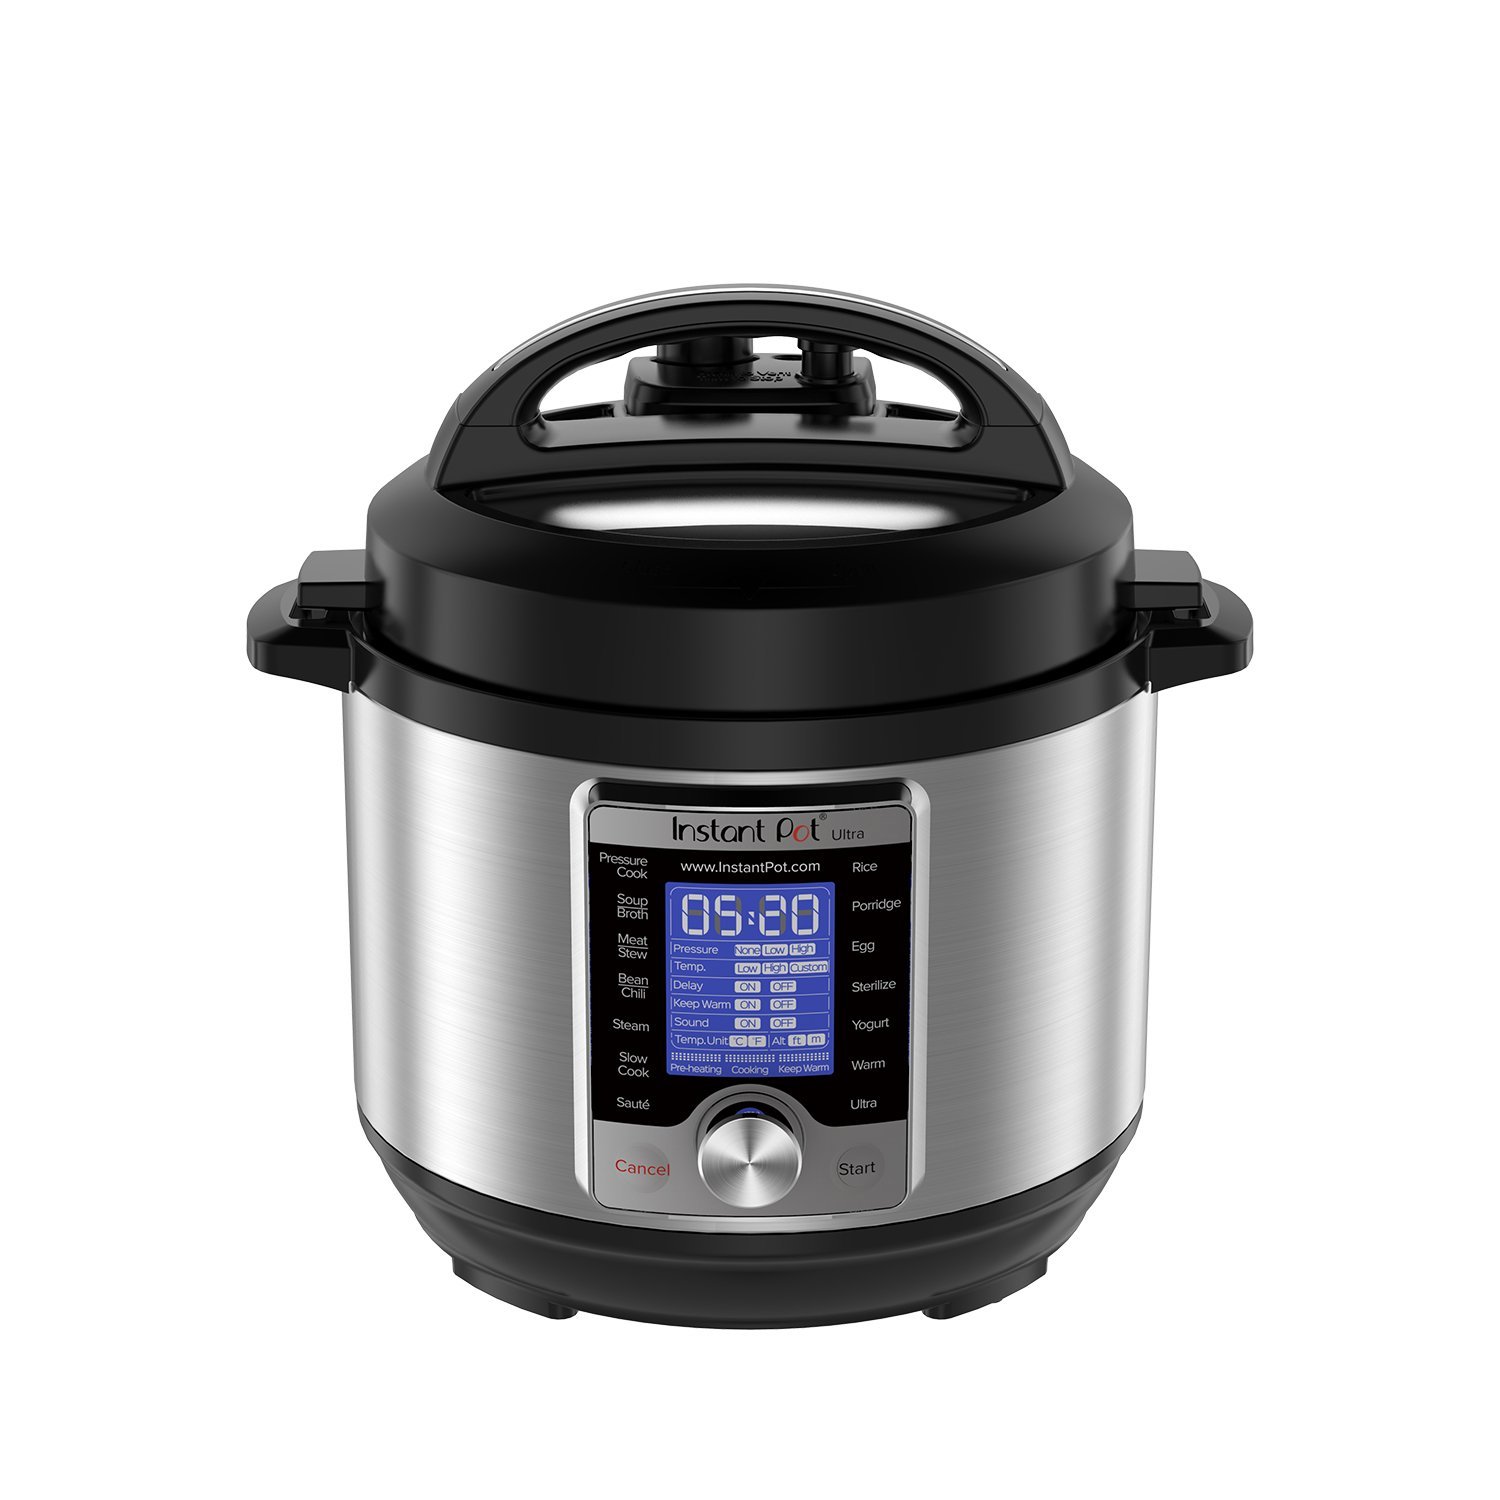 Prime members: Instant Pot Ultra 3-qt 10-in-1 multi-use programmable pressure cooker for $50